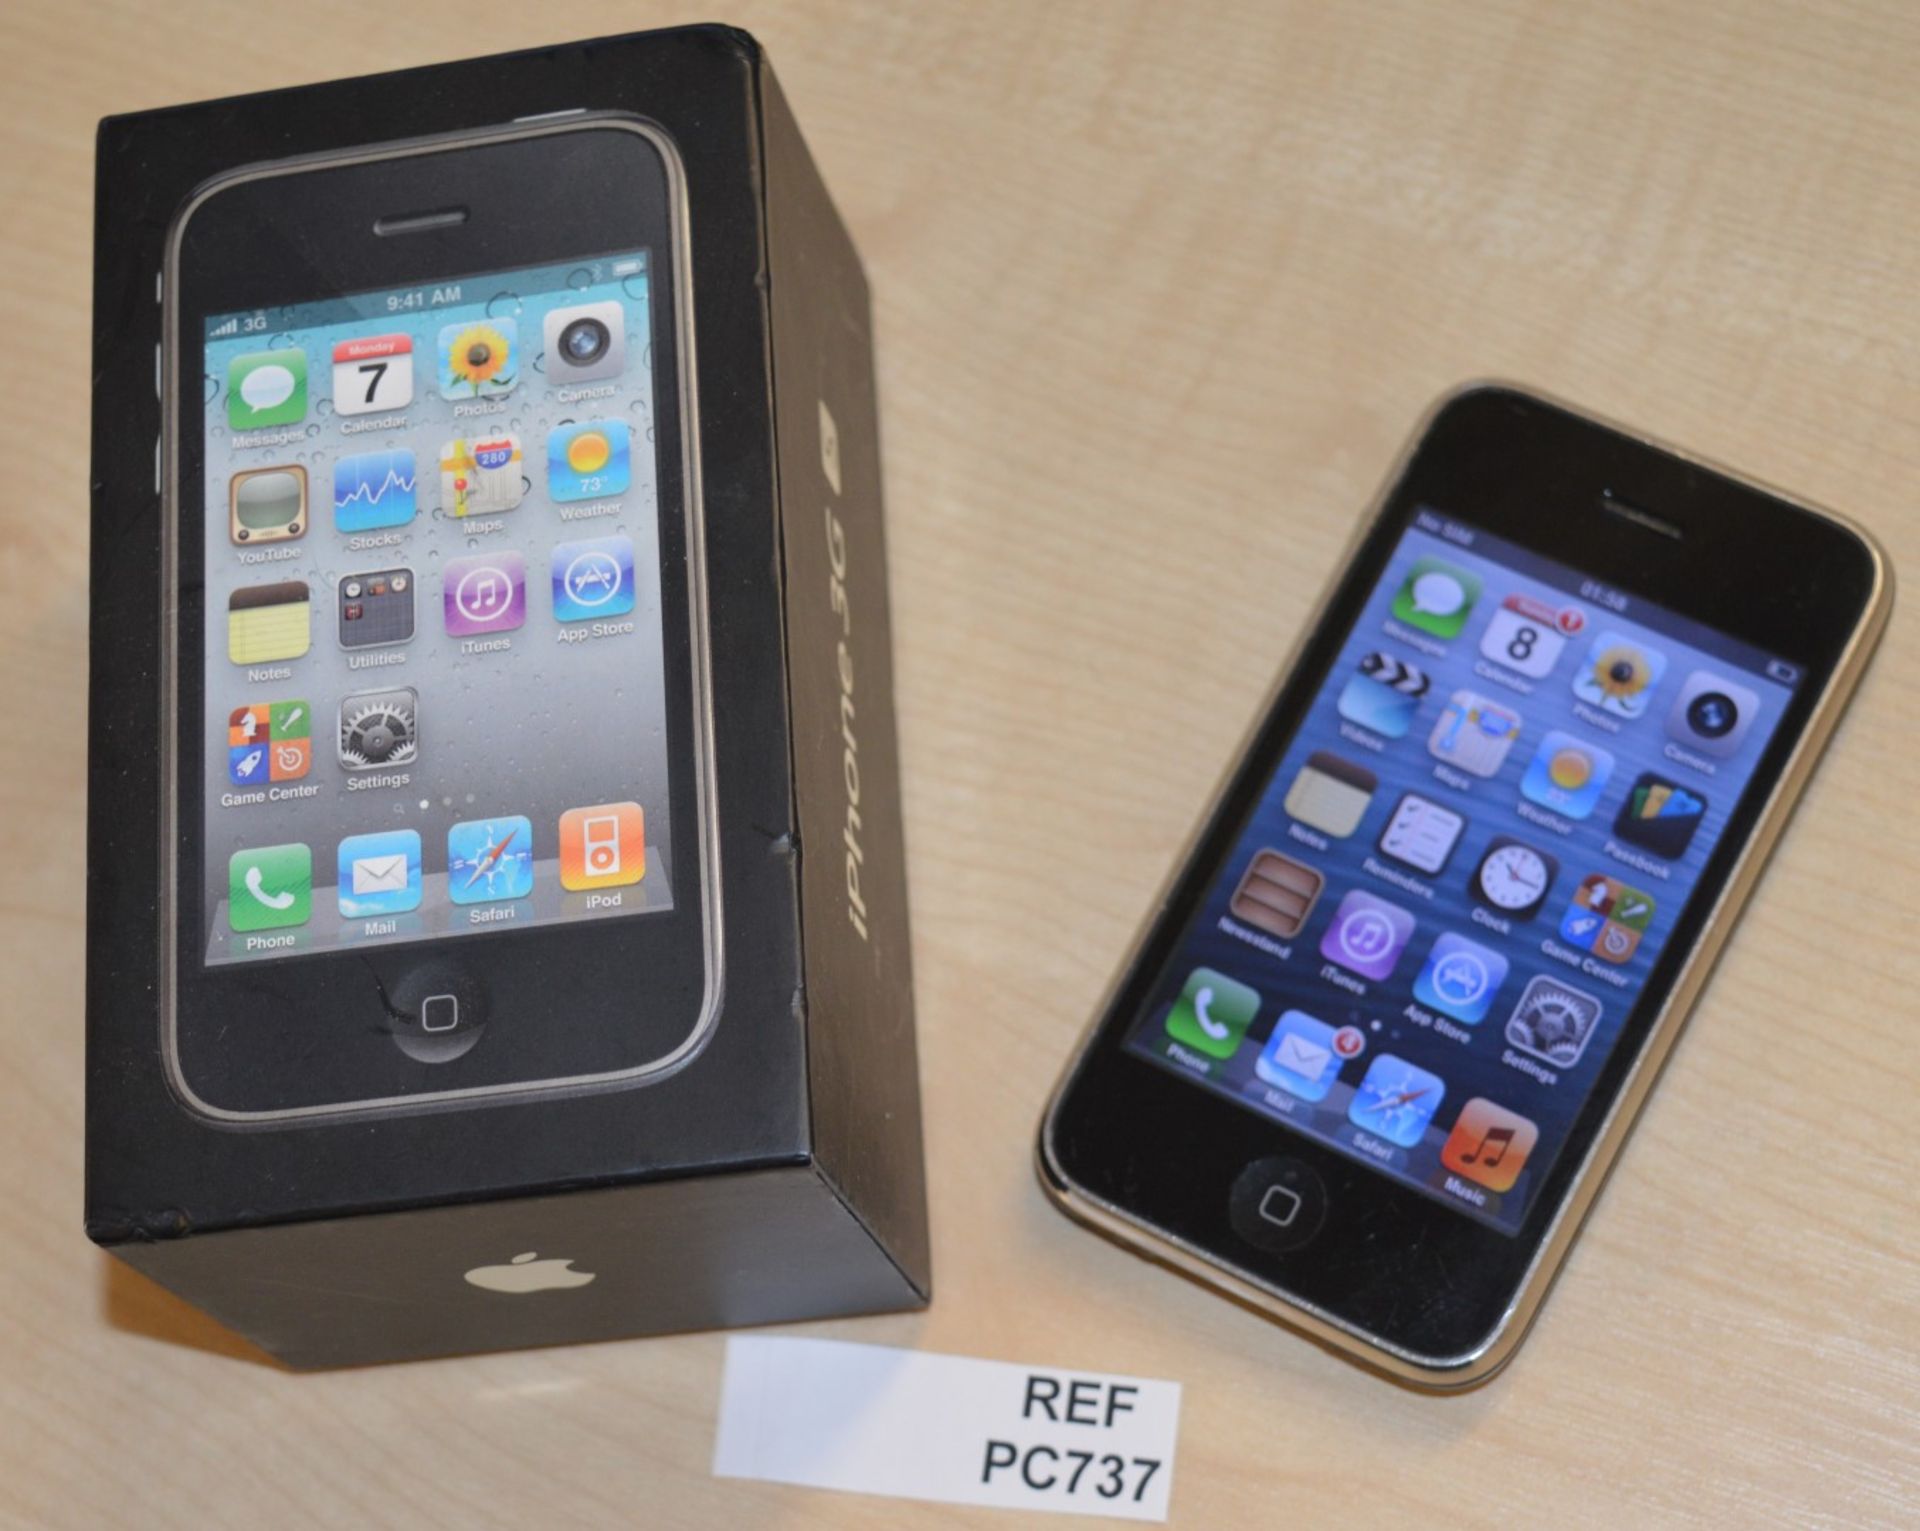 1 x Apple Iphone 3G 8GB Mobile Phone Handset - CL300 - Ref PC192 - Location: Altrincham WA14 - - Image 2 of 3